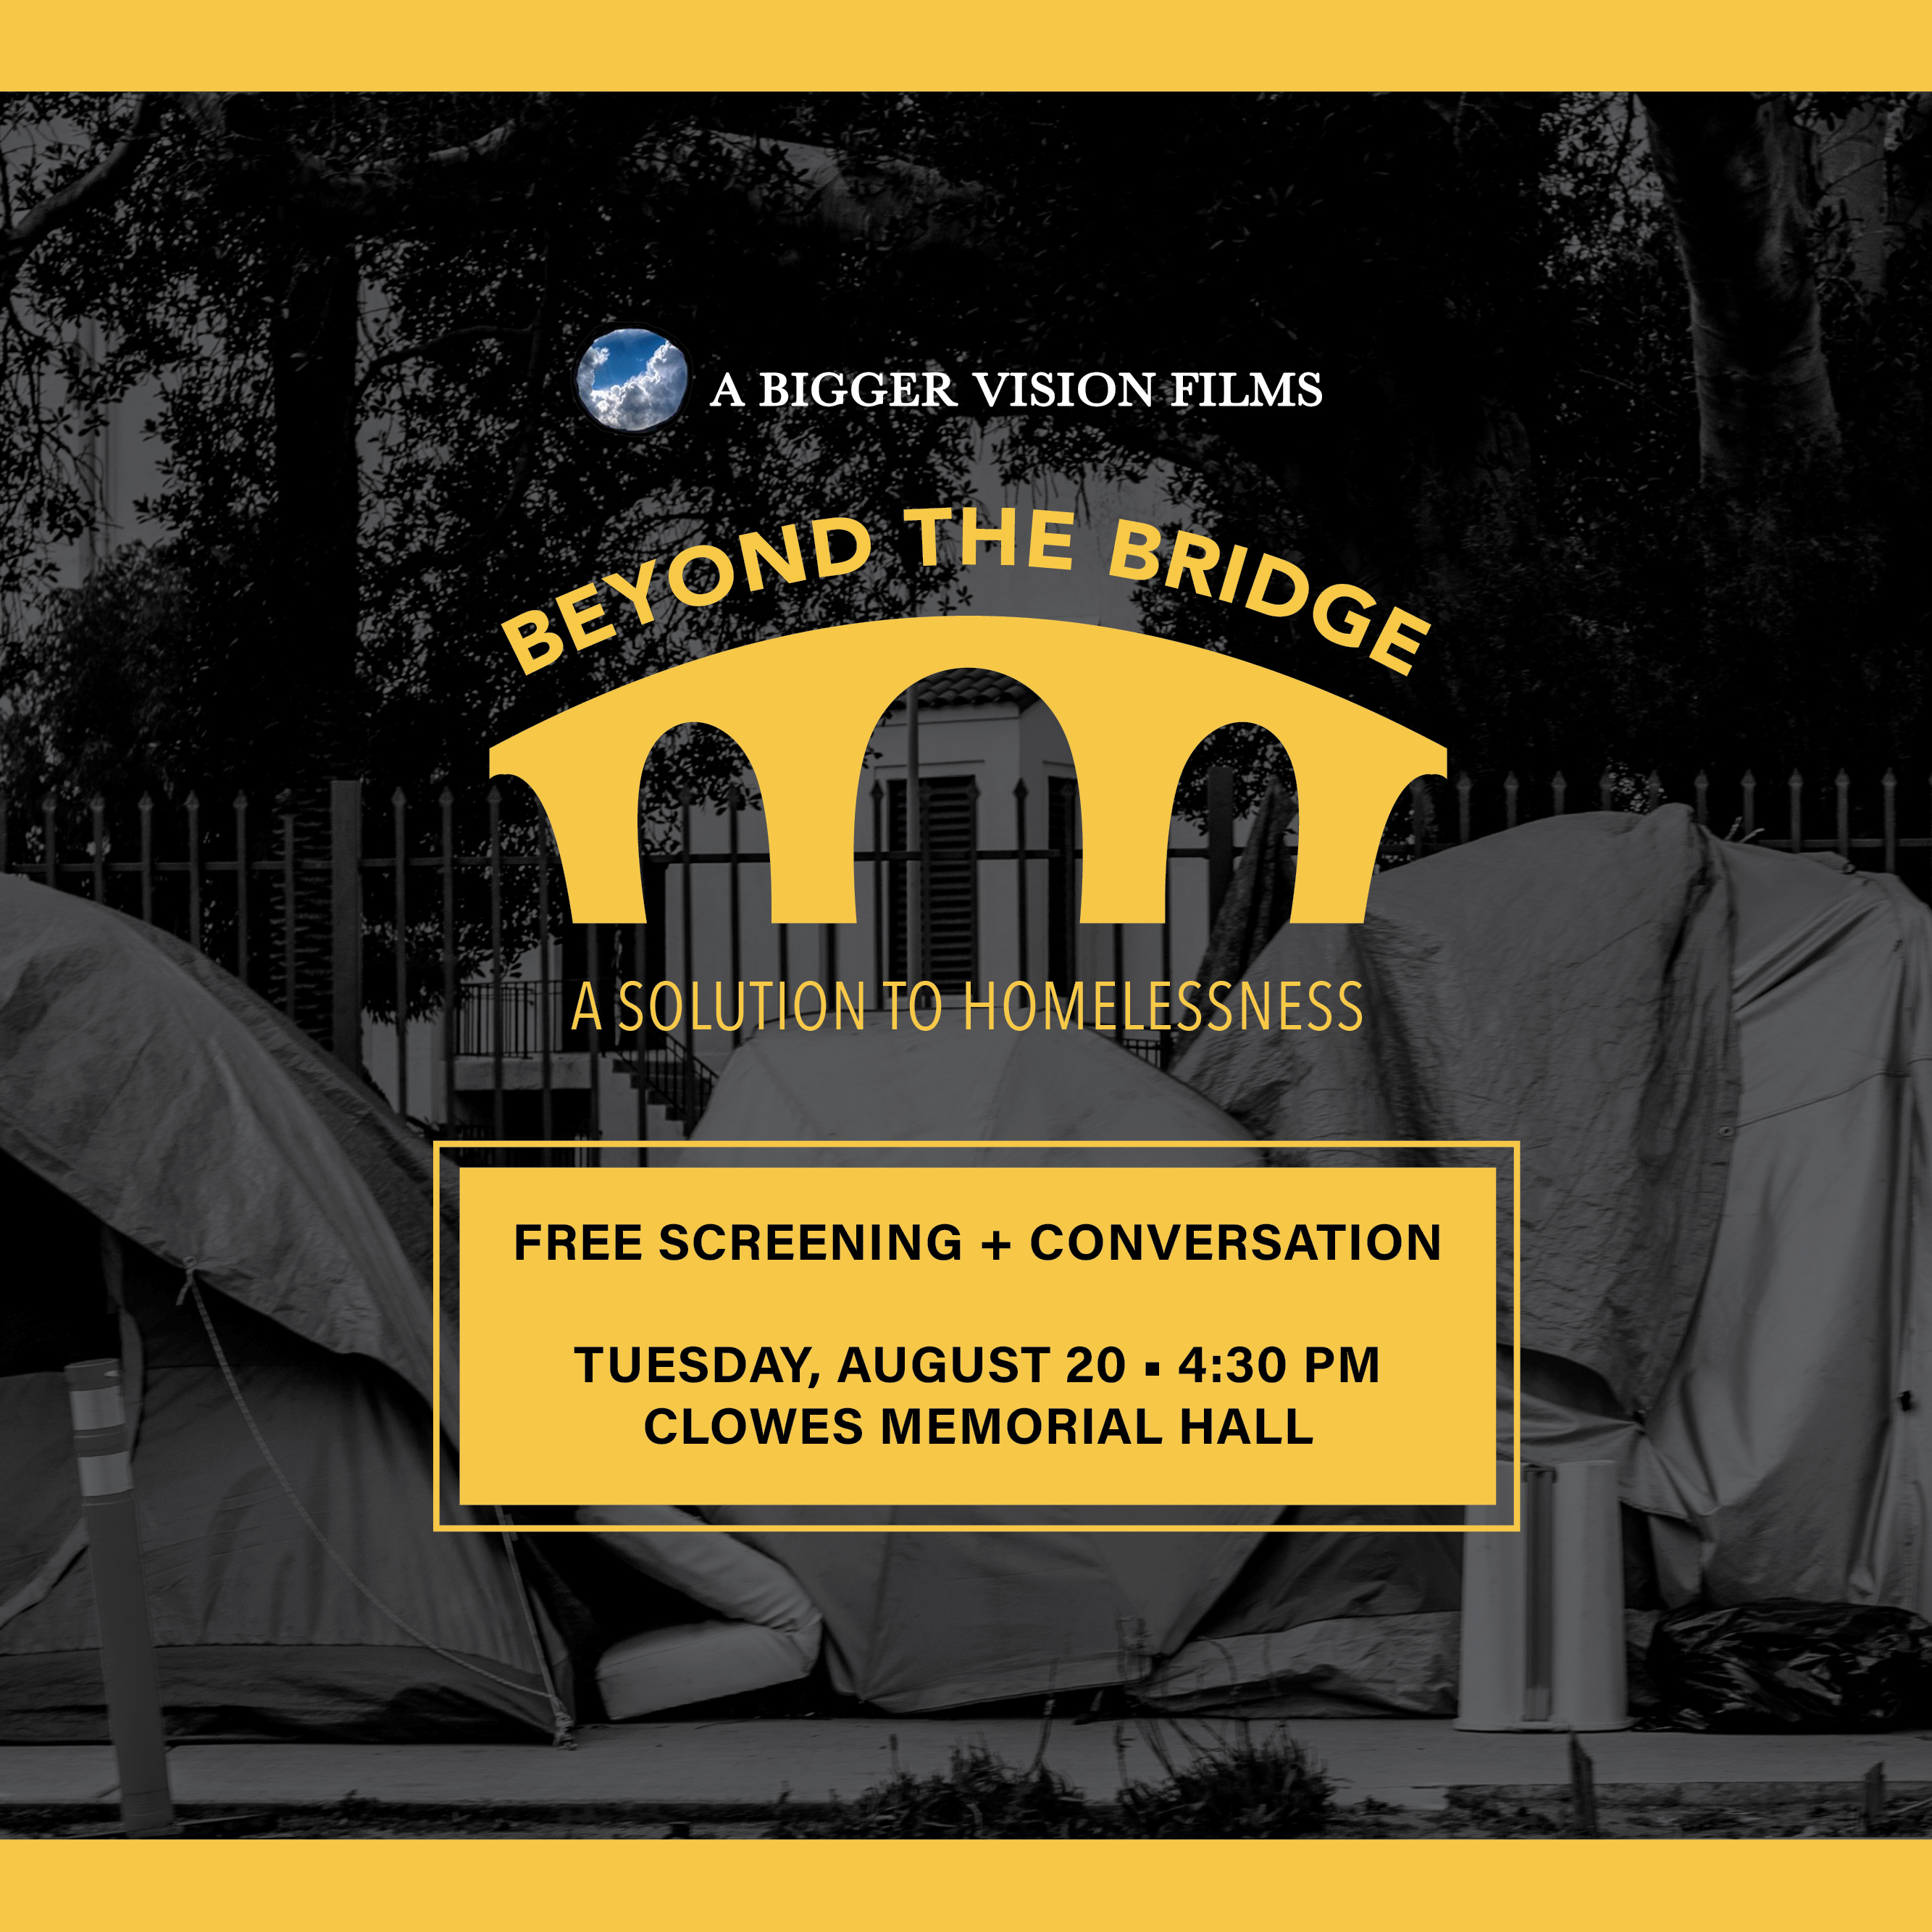 Beyond the Bridge: A Solution to Homelessness Documentary Screening and Conversation
August 20, 4:30 – 6 PM, Clowes Memorial Hall
Learn about solutions to homelessness through this ambitious documentary film.
